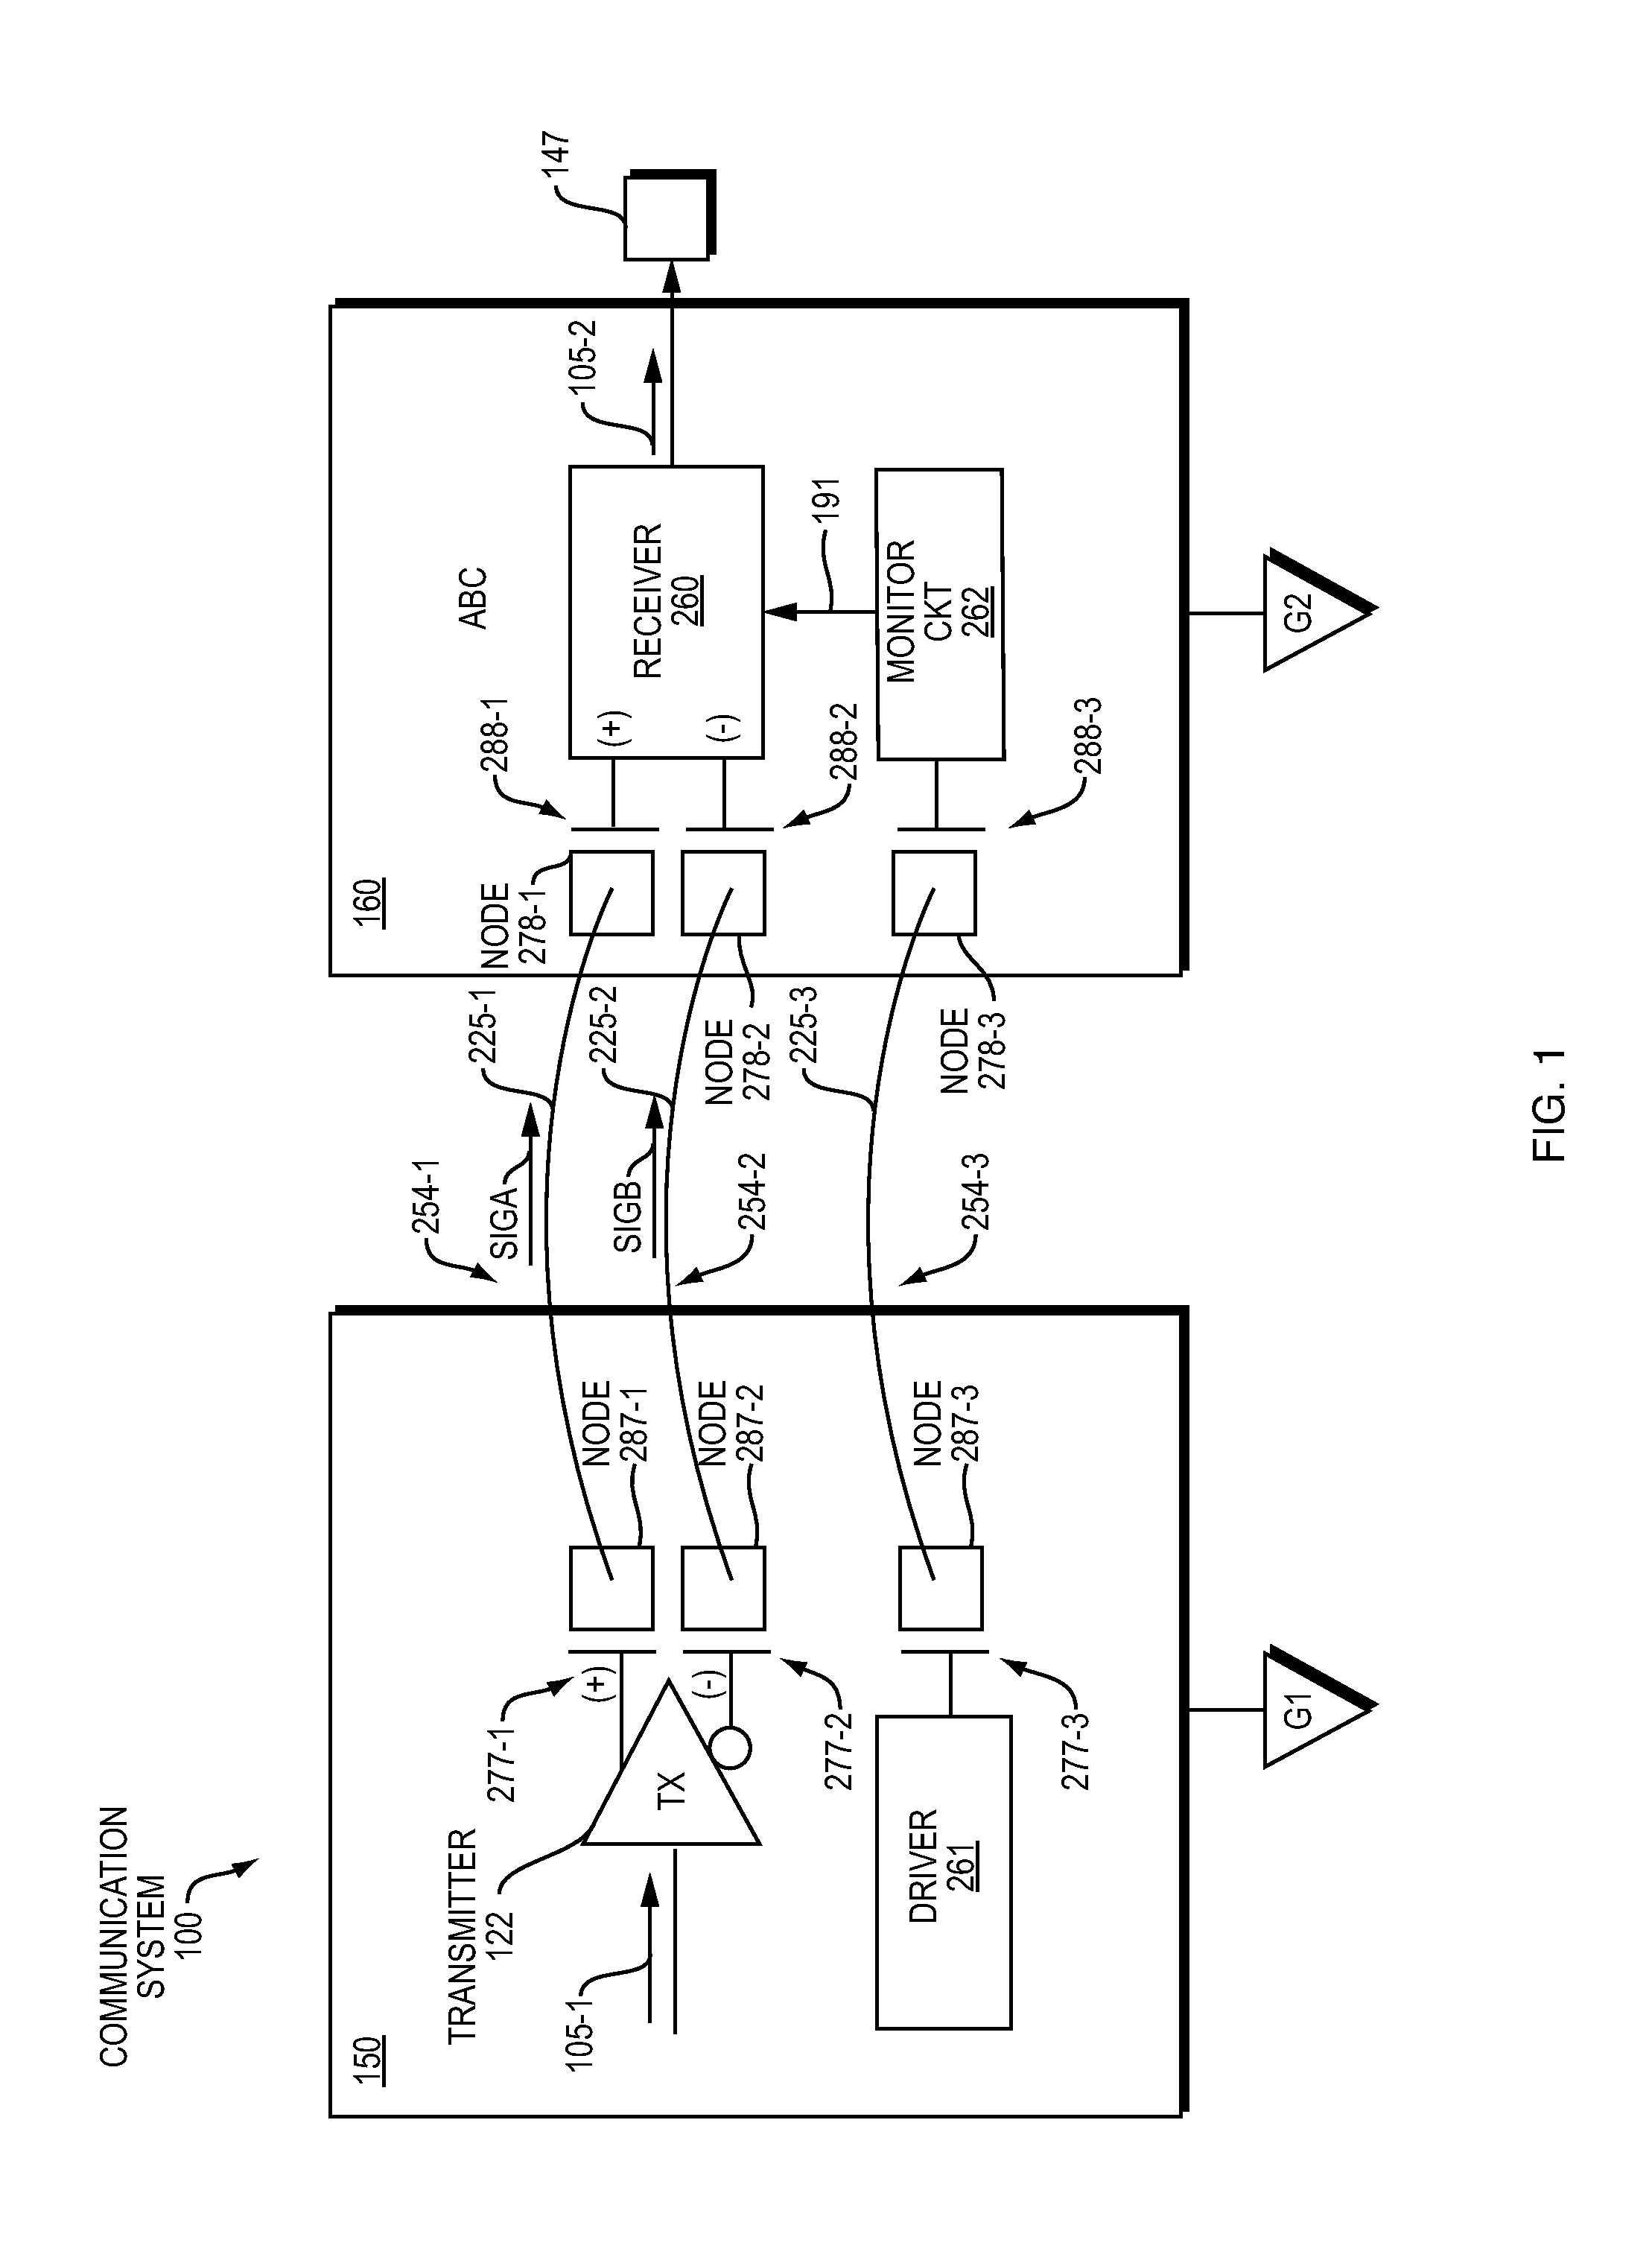 Methods and circuitry to trim common mode transient control circuitry